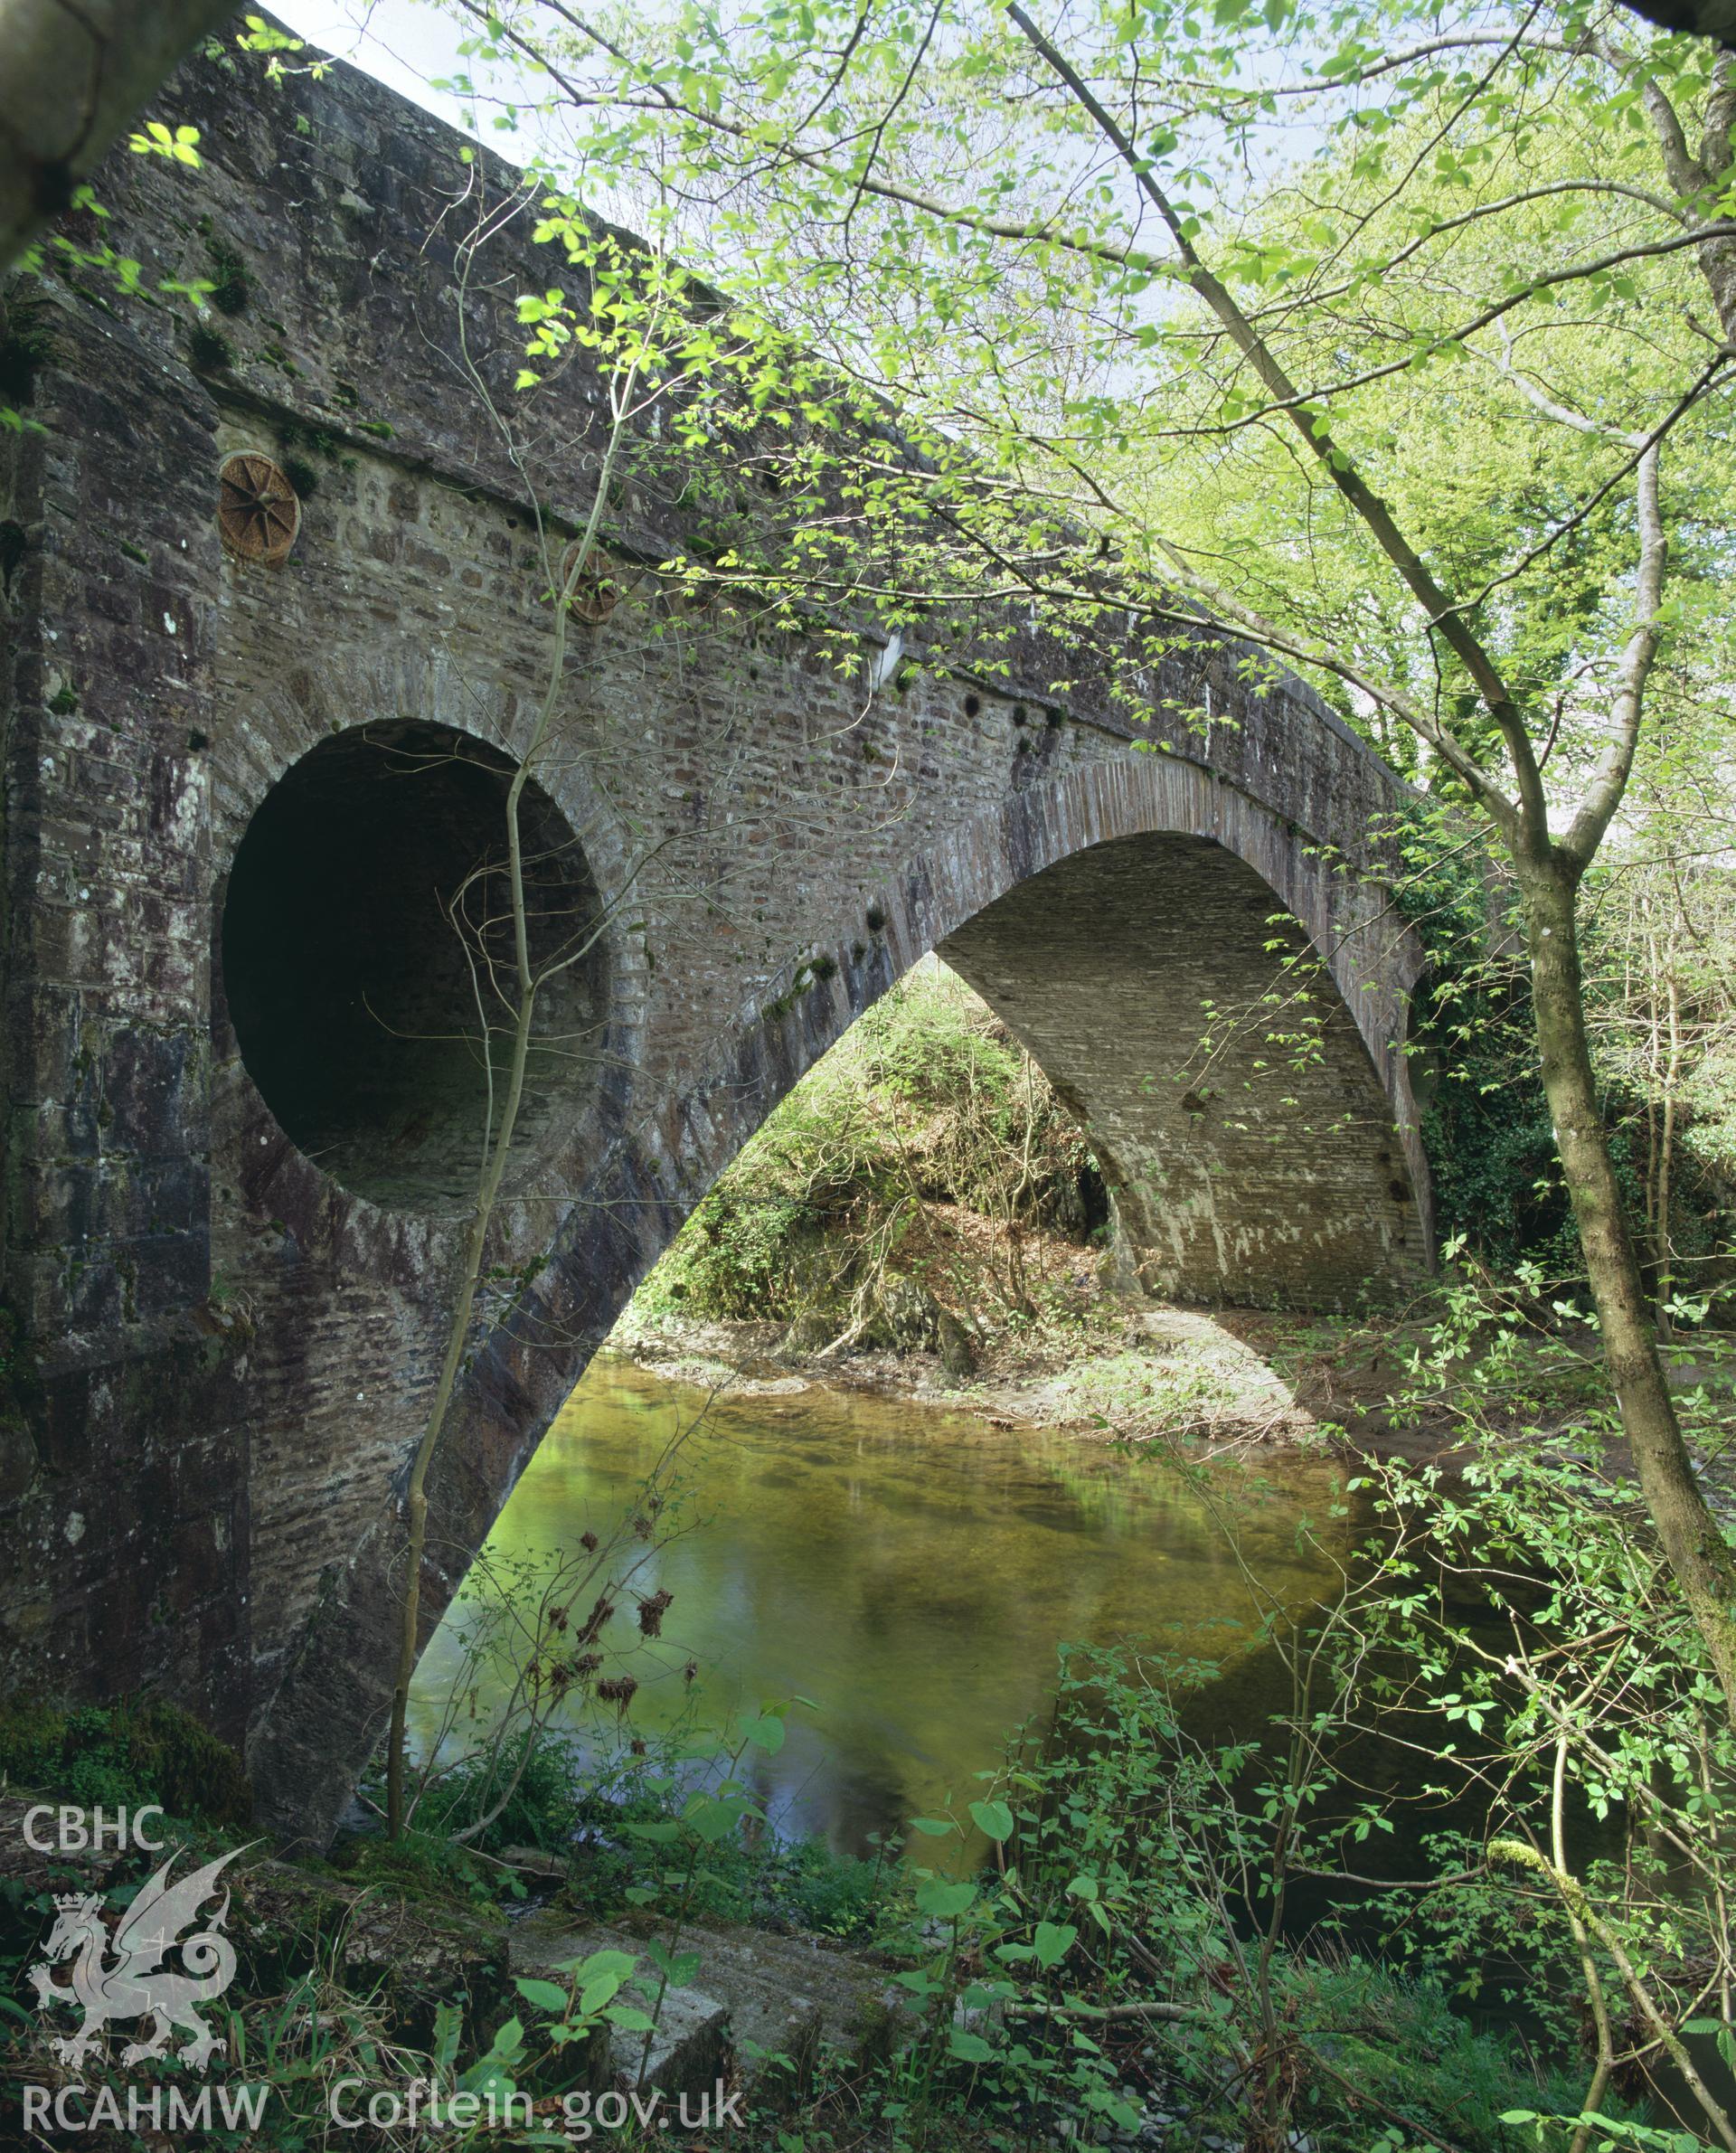 Colour transparency showing a view of Pont Newydd, Cilycwm, produced by Iain Wright, June 2004